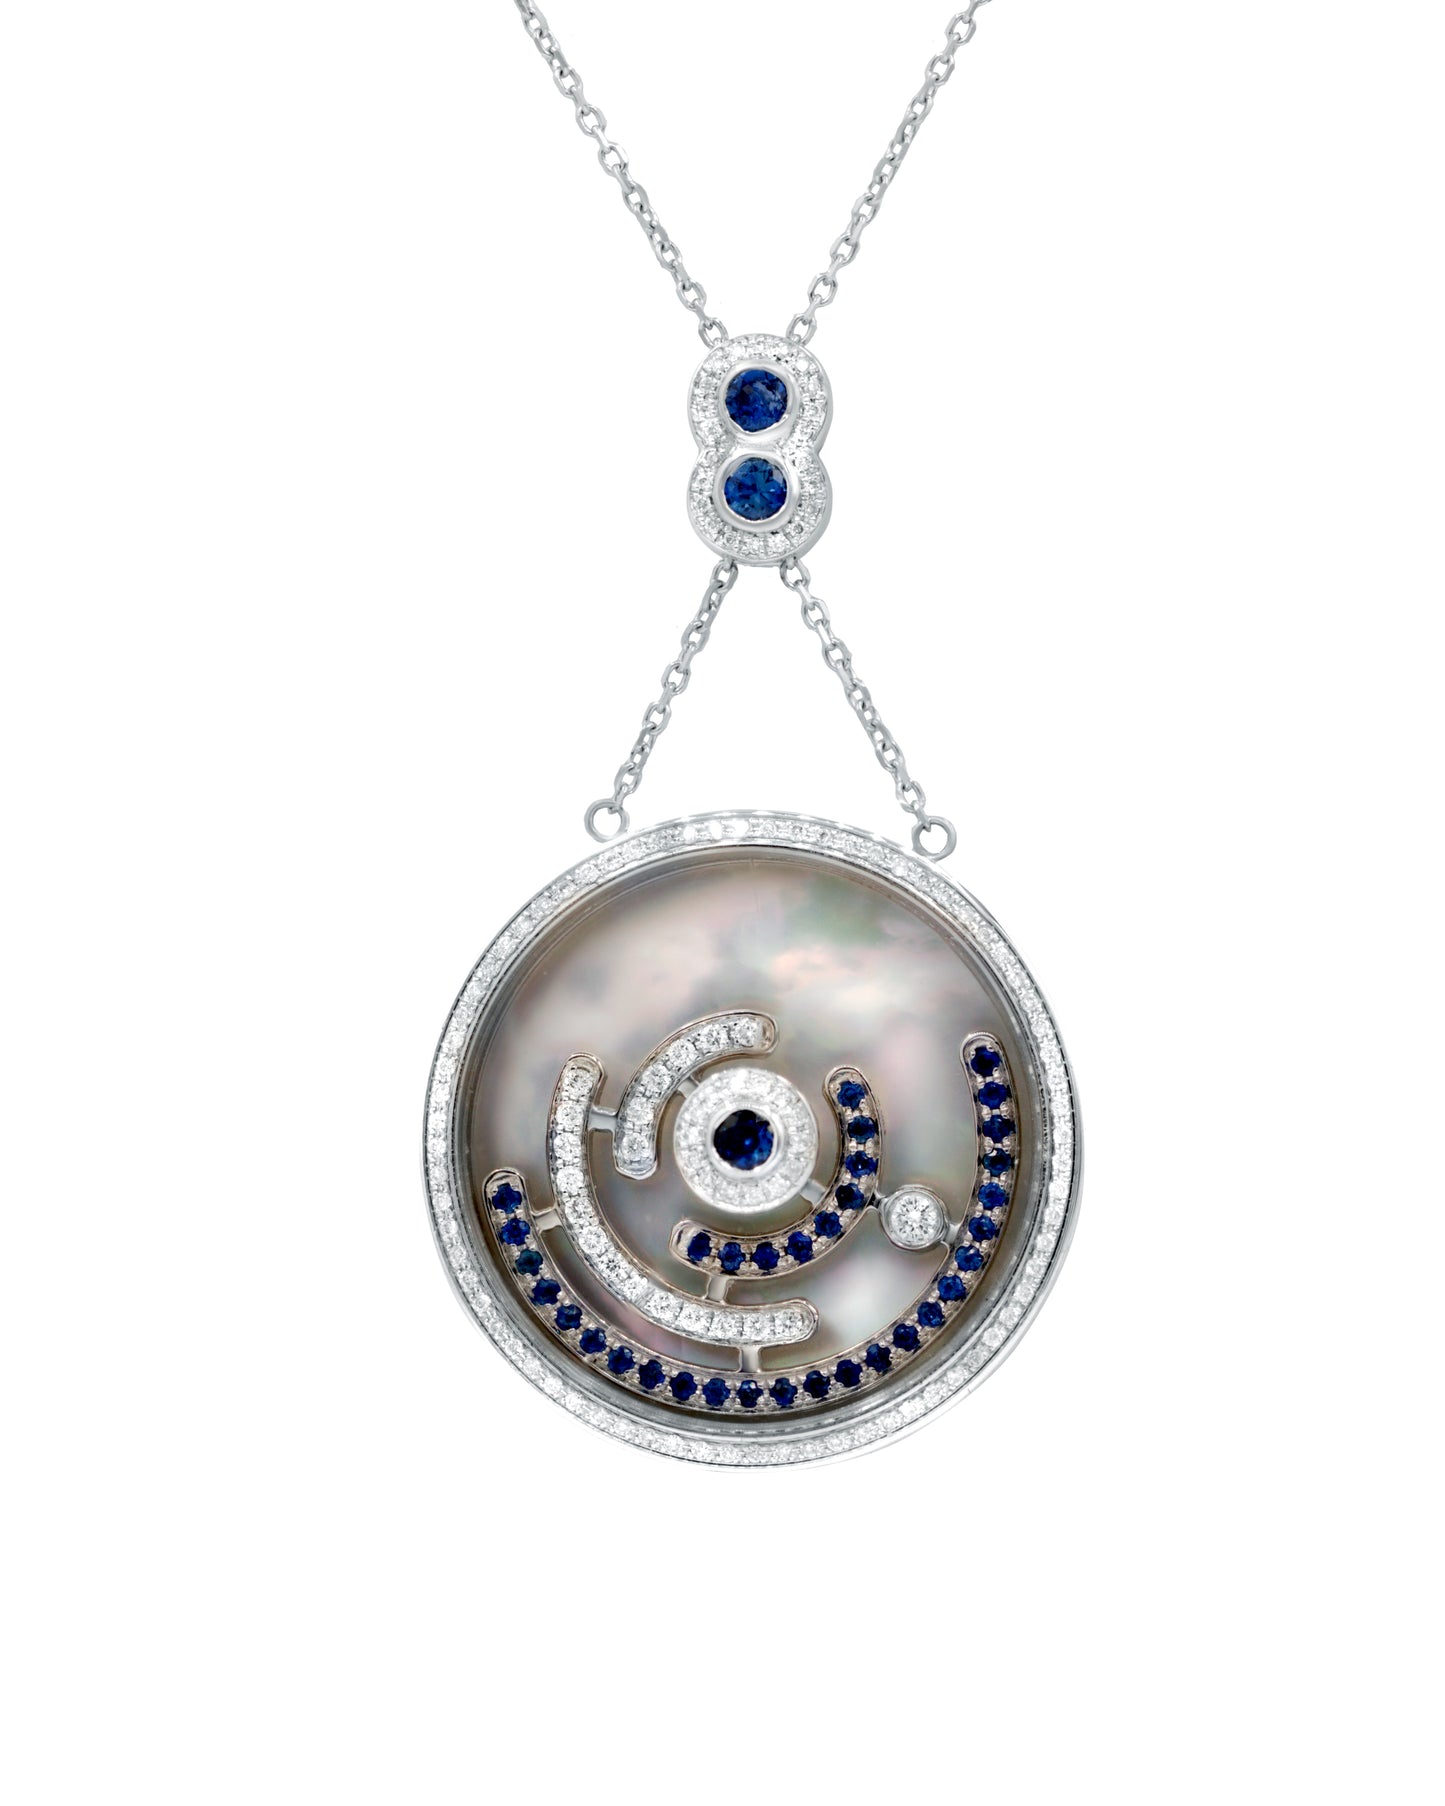 Monary Necklace featuring 0.55 carats of Diamonds, 0.72 carats of sapphires set in 18 K White Gold with 179 Stones